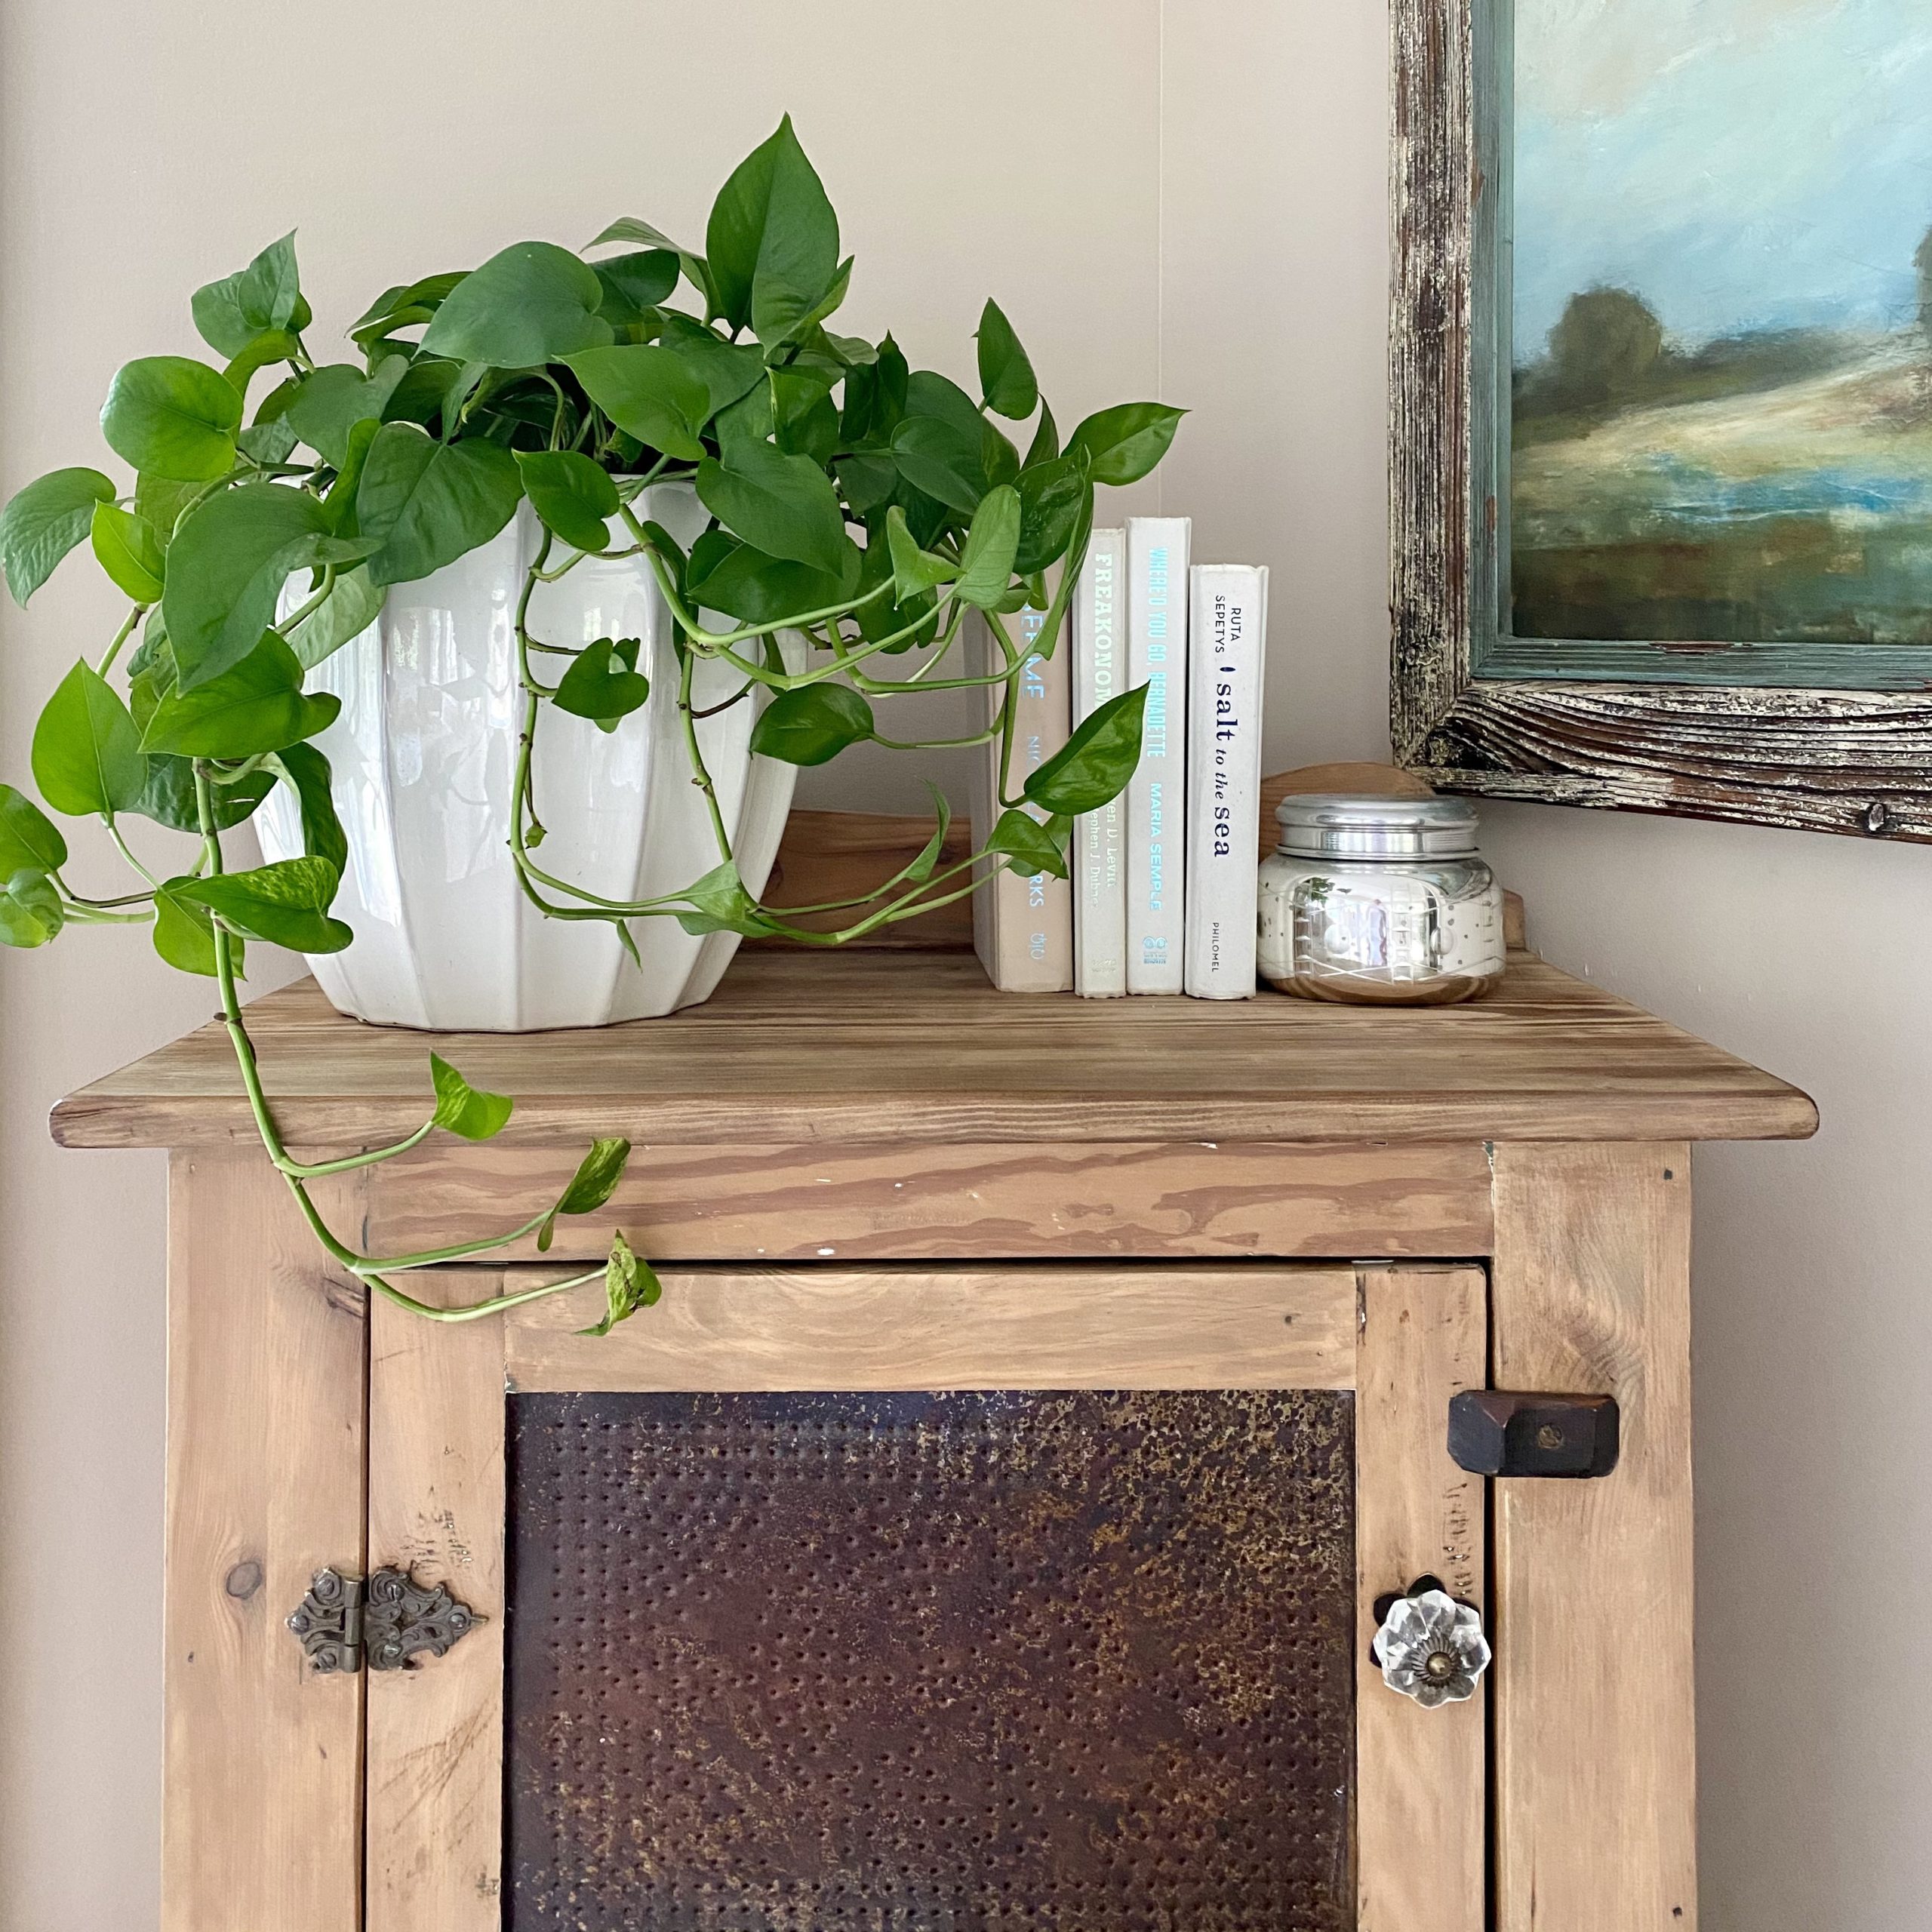 Pothos plant in a white plater sitting atop a wood cabinet with books and a candle.